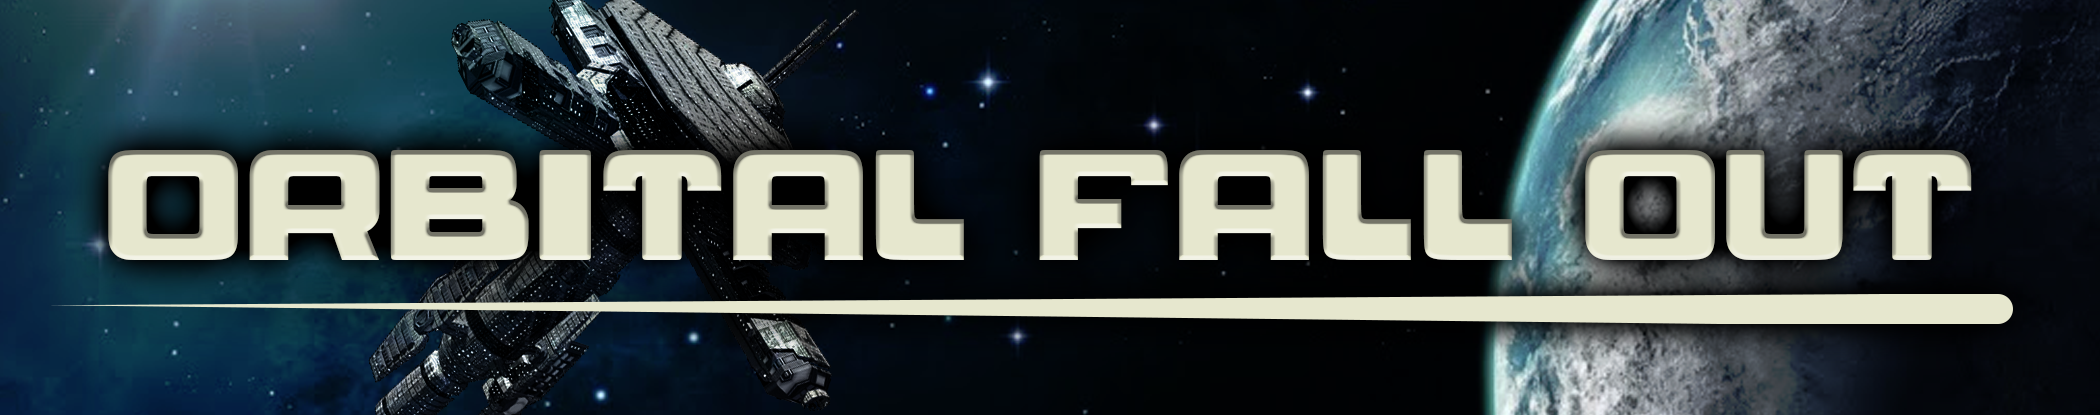 Orbital Fall Out